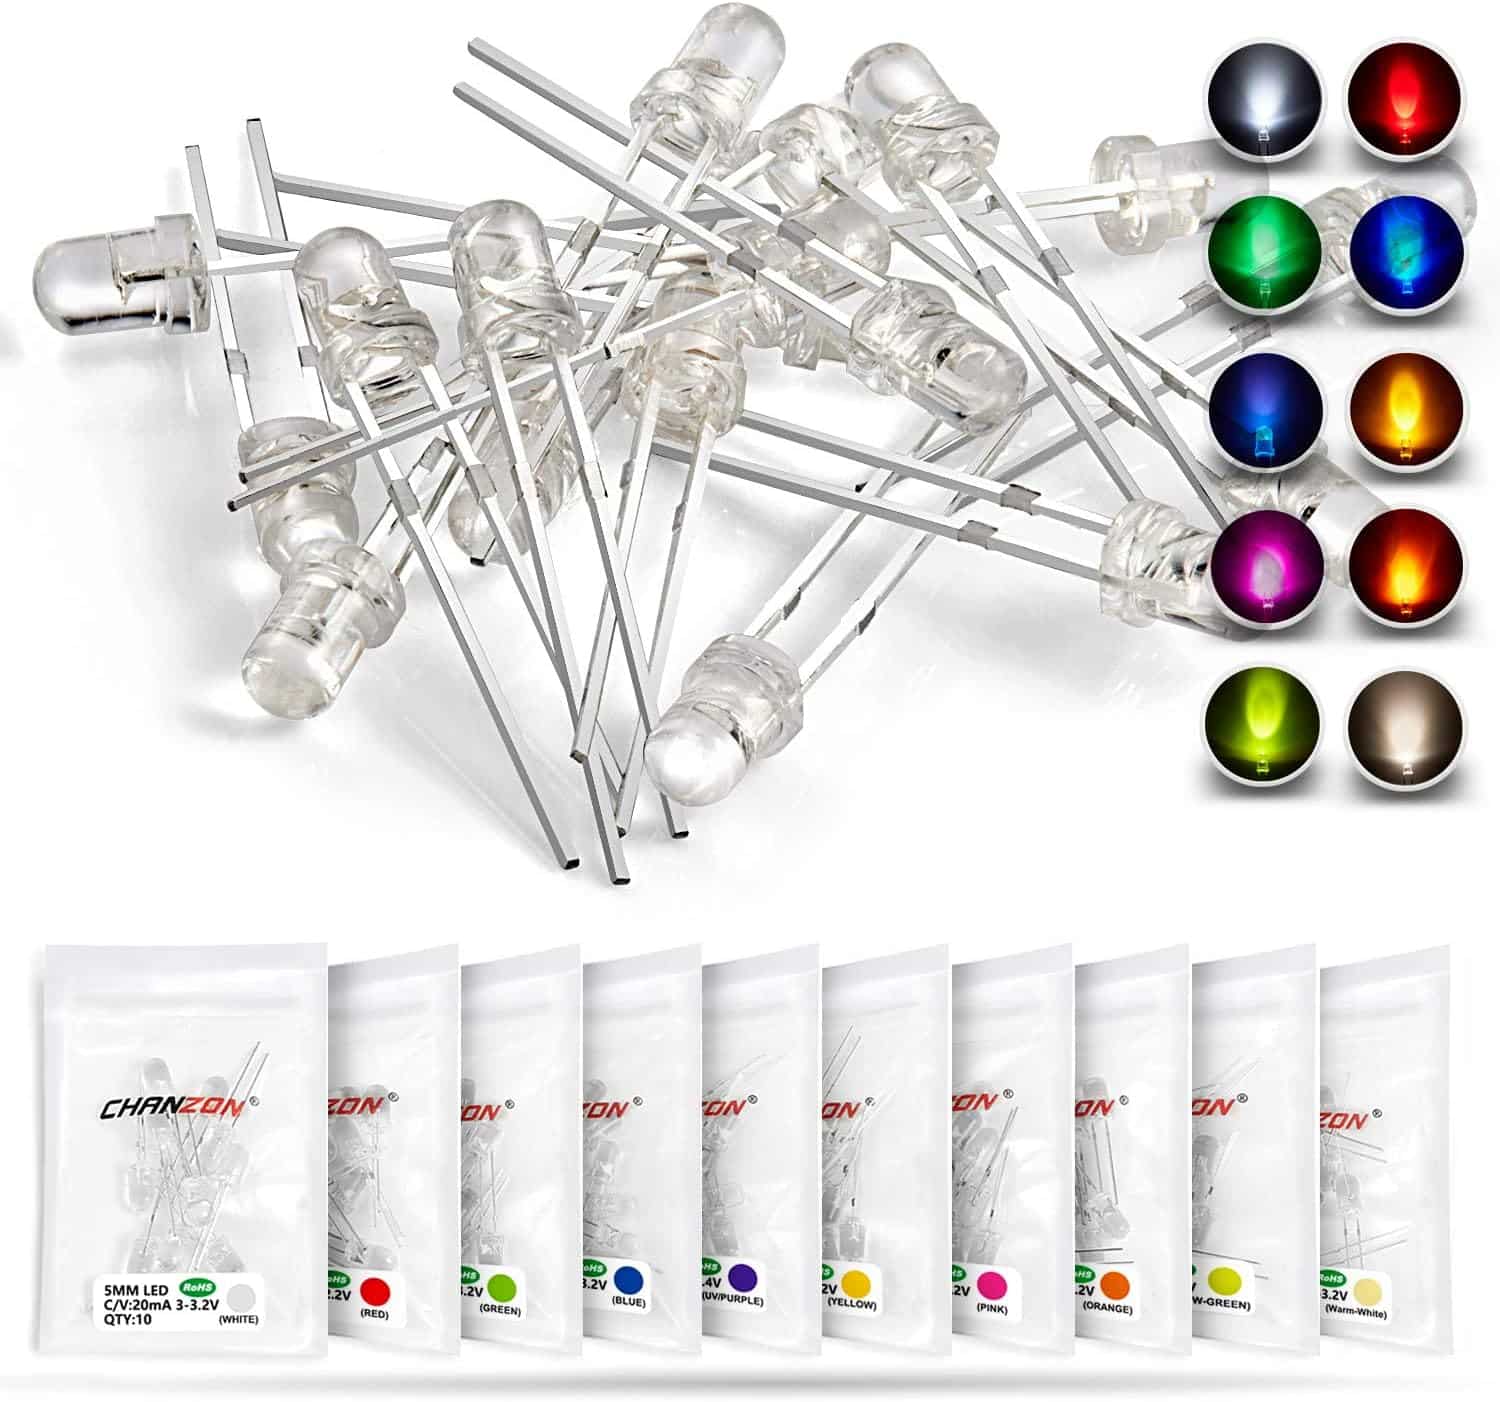 CHANZON 3mm LED Diode Assortment Review